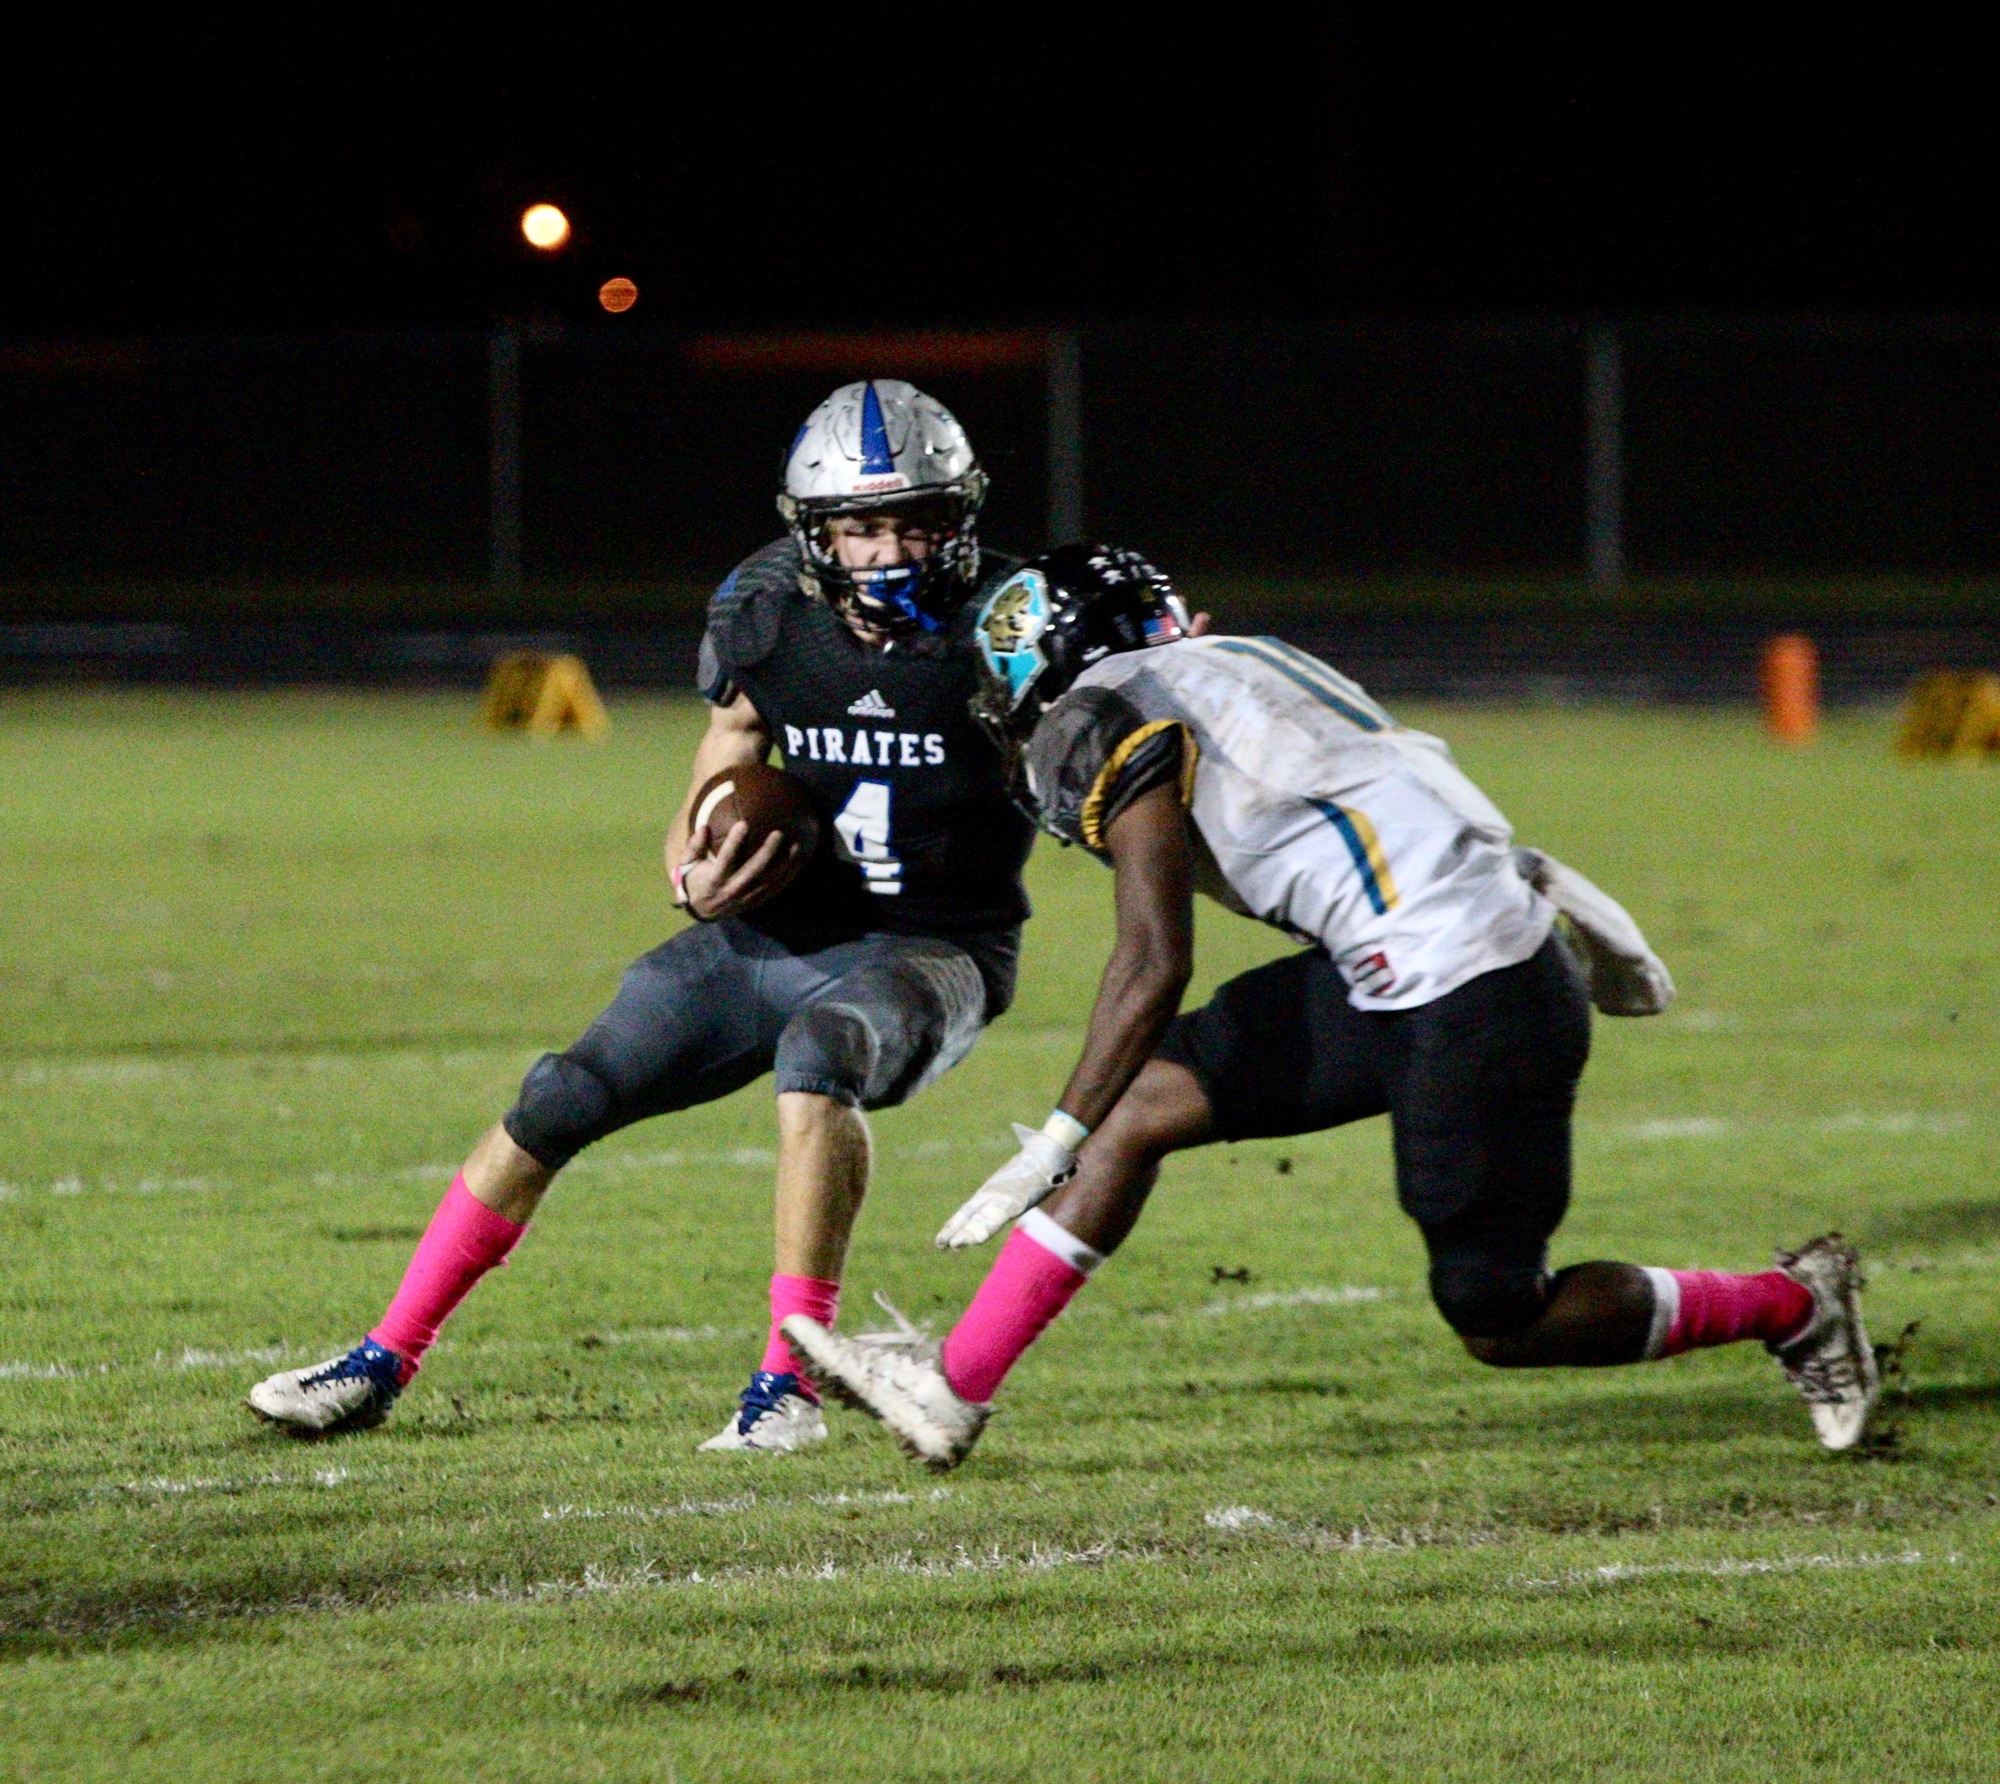 Matanzas' Josef Powell attempts to dodge a tackle against Pine Ridge. File photo